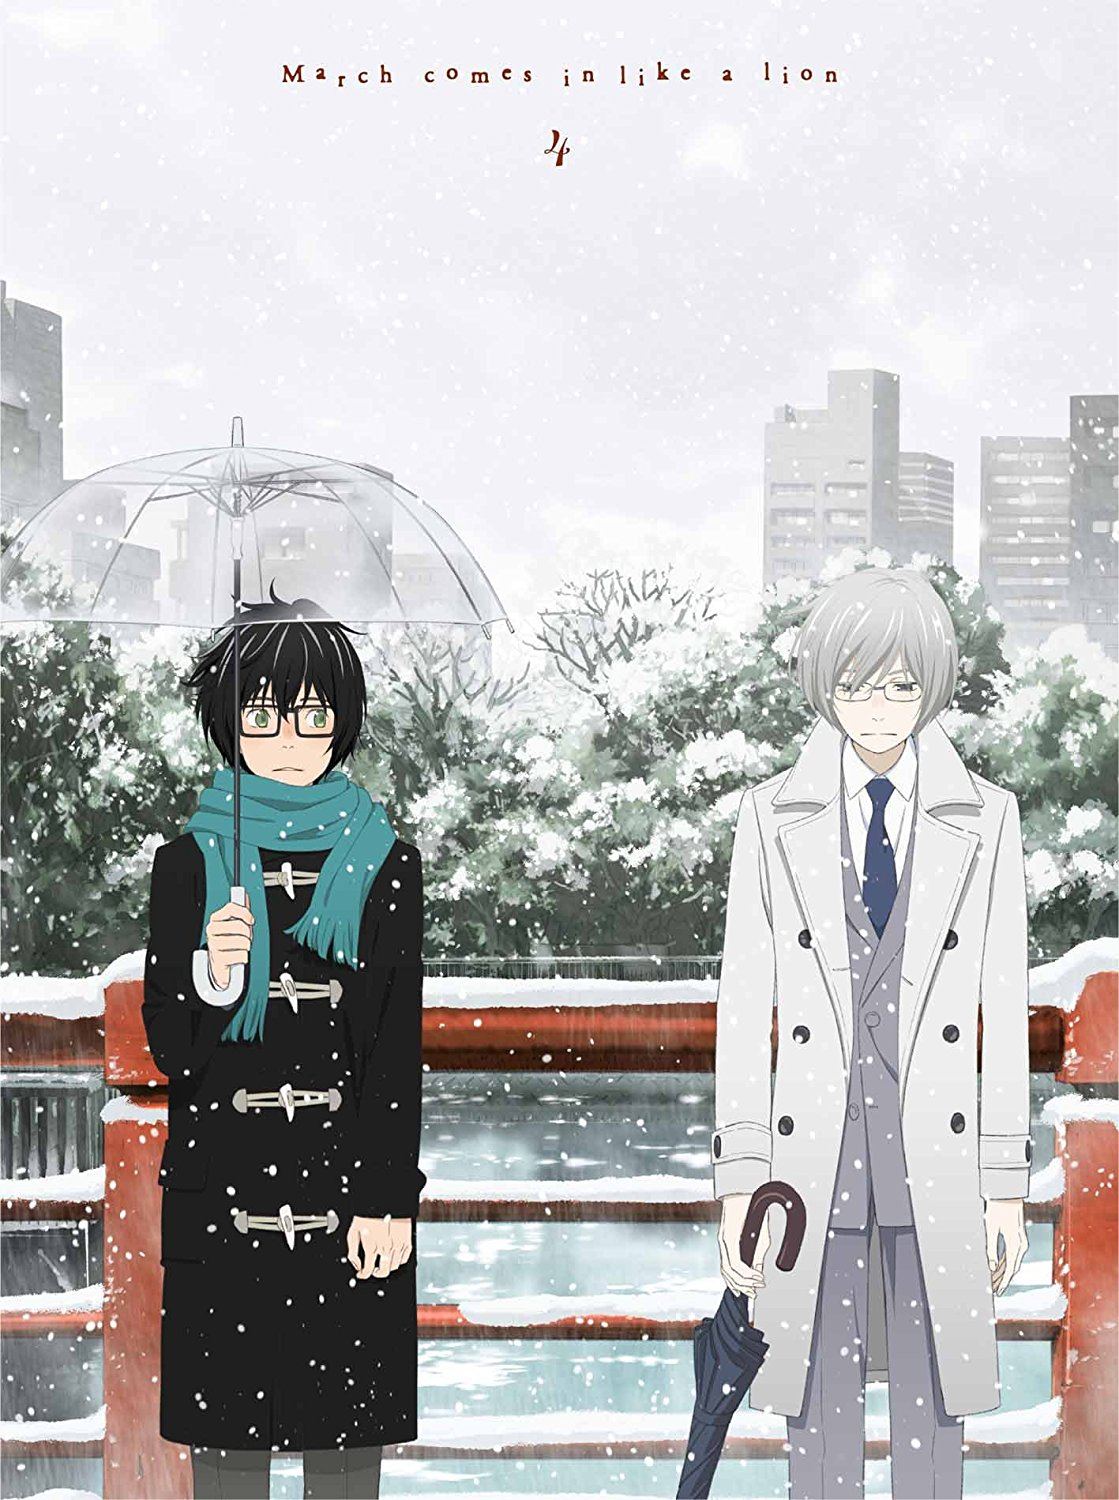 March Comes In Like A Lion (3 Gatsu No Lion) 4 [Limited Edition]